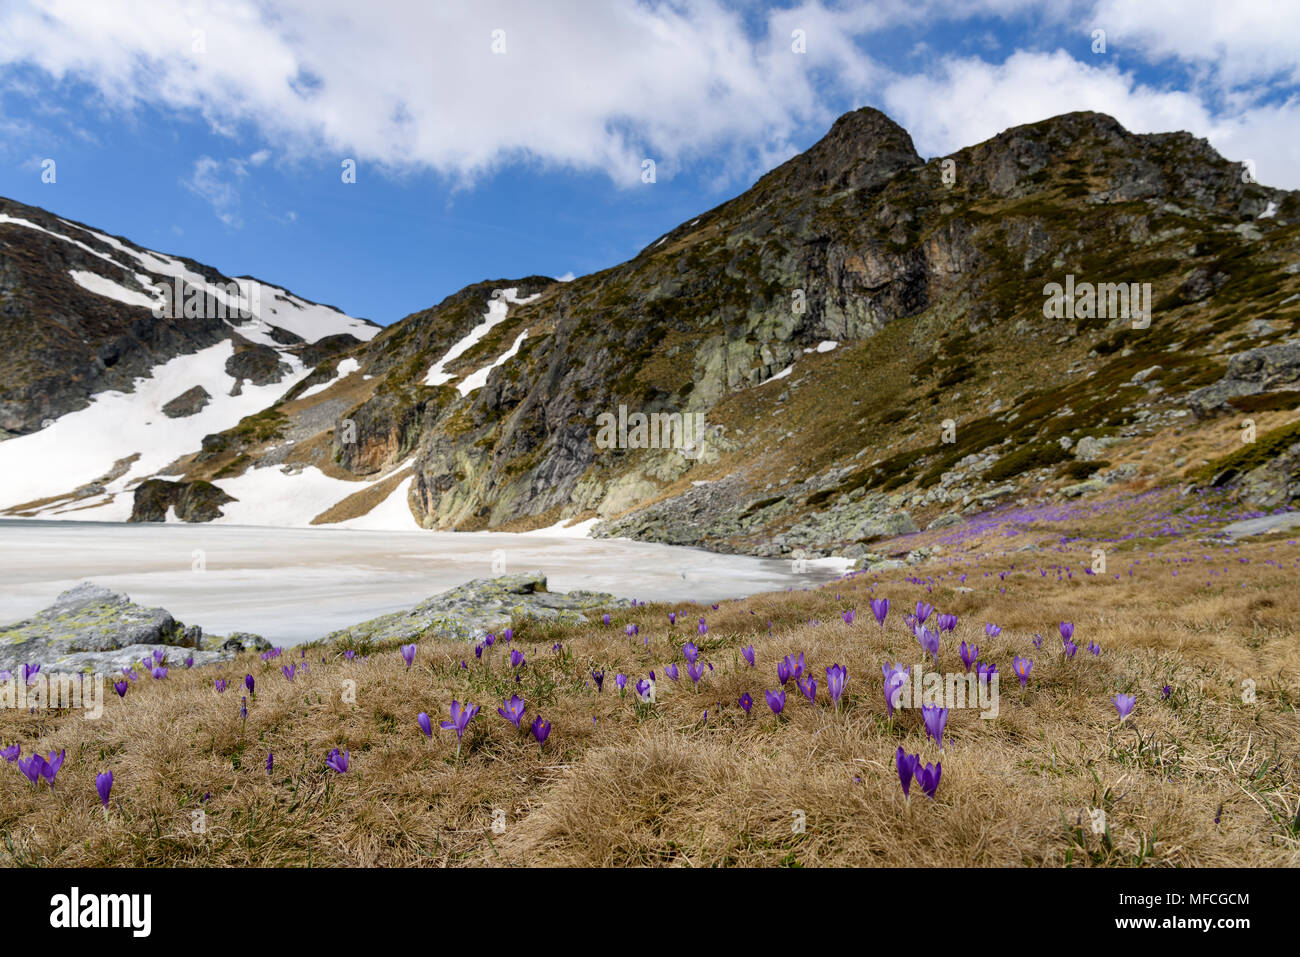 Springtime scenery of frozen lake, rugged mountain peaks in background and purple crocuses in foreground, Rila mountains, Bulgaria Stock Photo